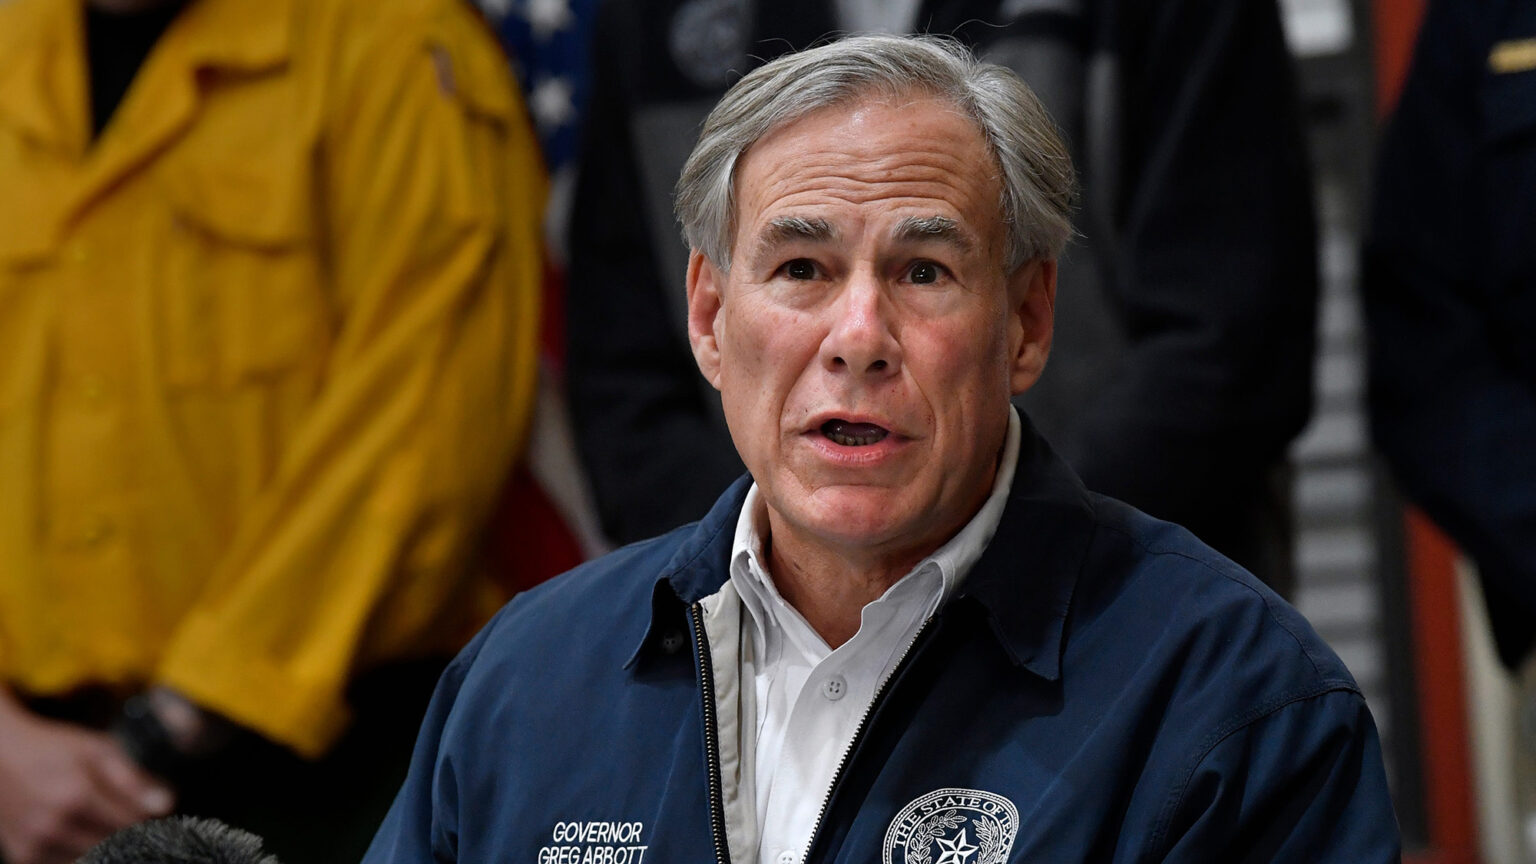 Gov. Abbott cancels appearance at NRA convention